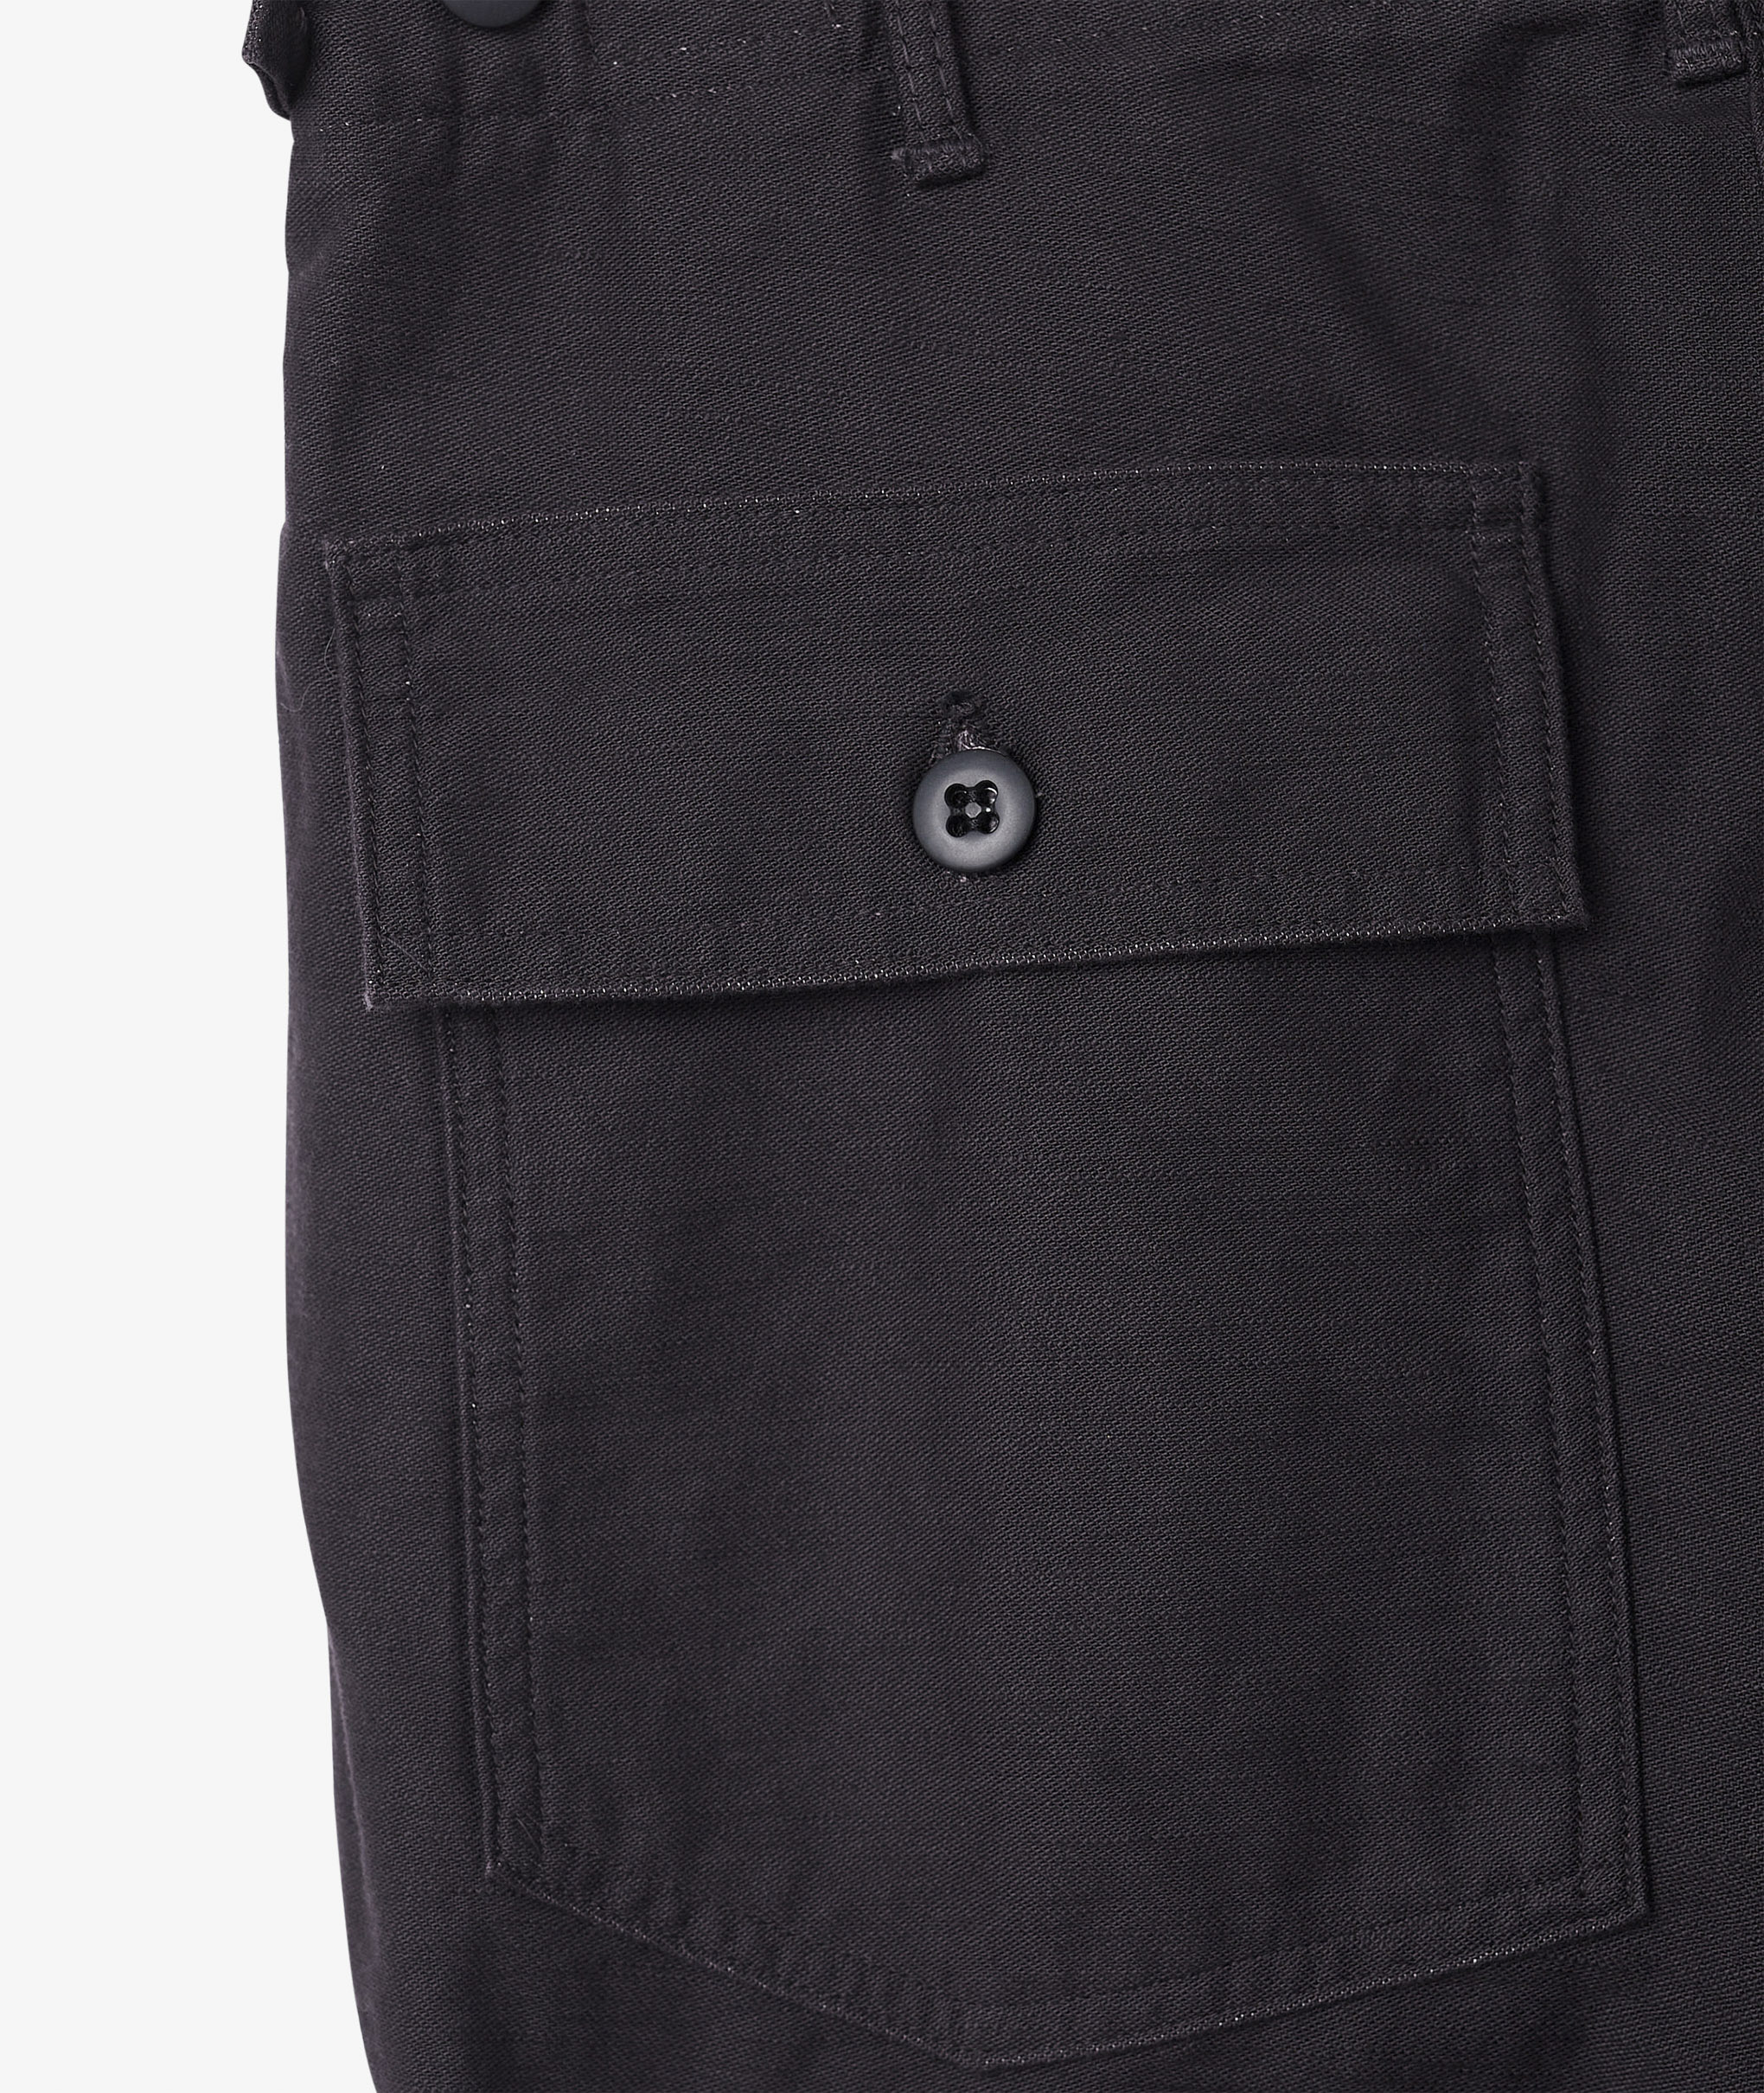 Norse Store | Shipping Worldwide - orSlow REGULAR FIT FATIGUE PANTS - Black